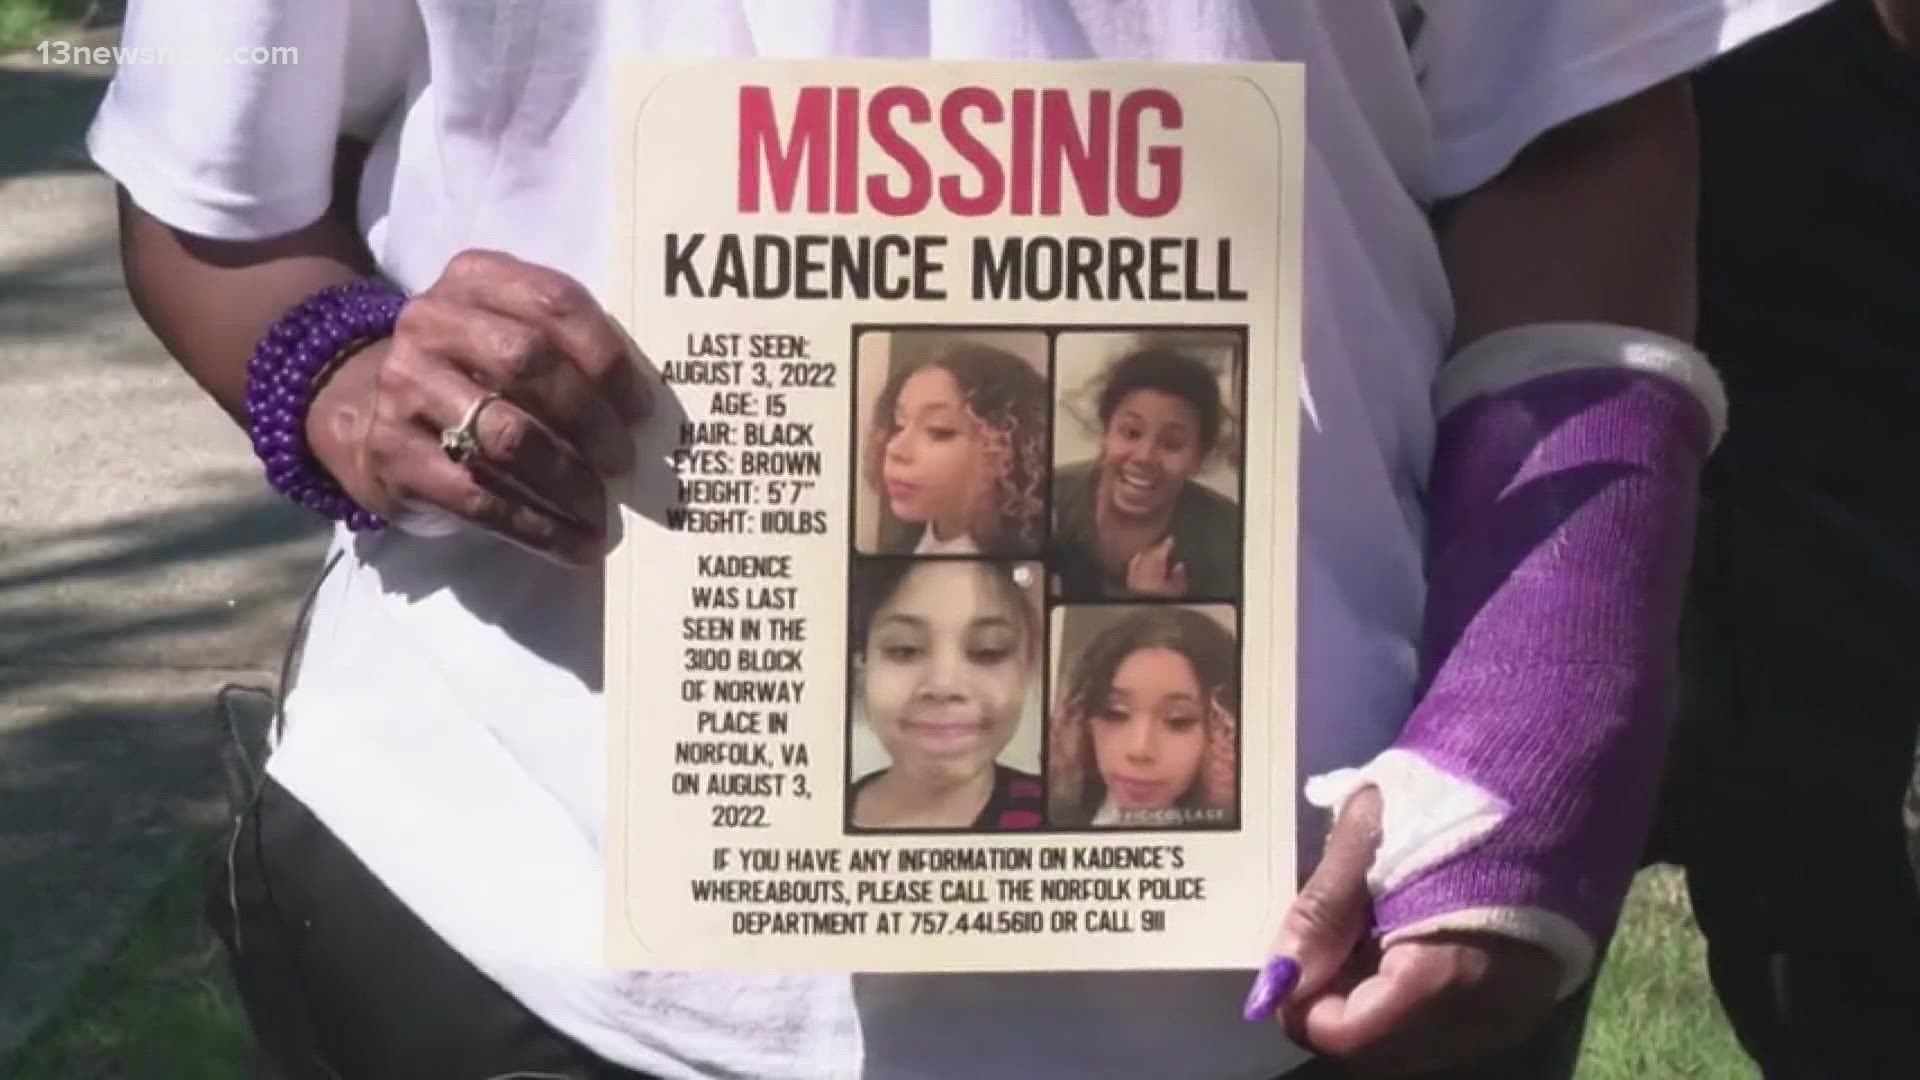 Kadence Morrell was found safe in Arizona after being reported missing in Norfolk.